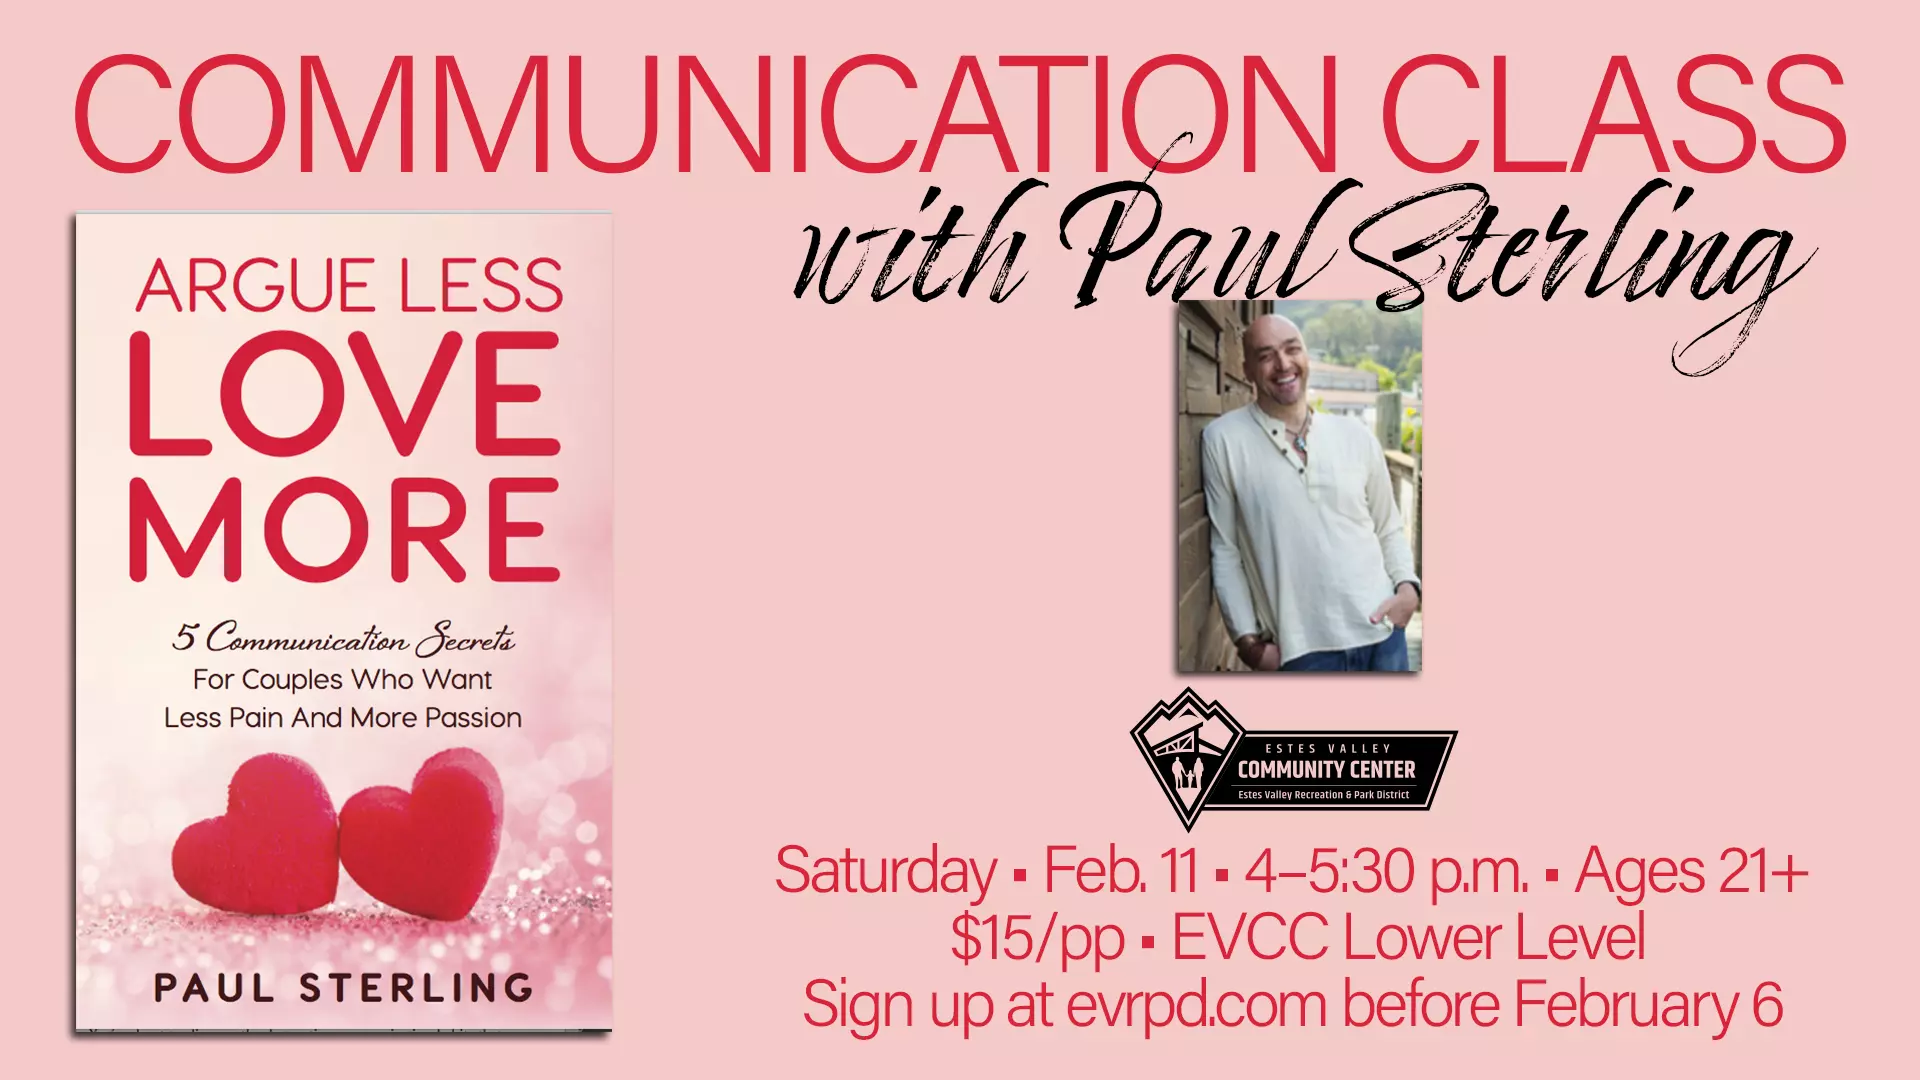 Communication class with Paul Sterling